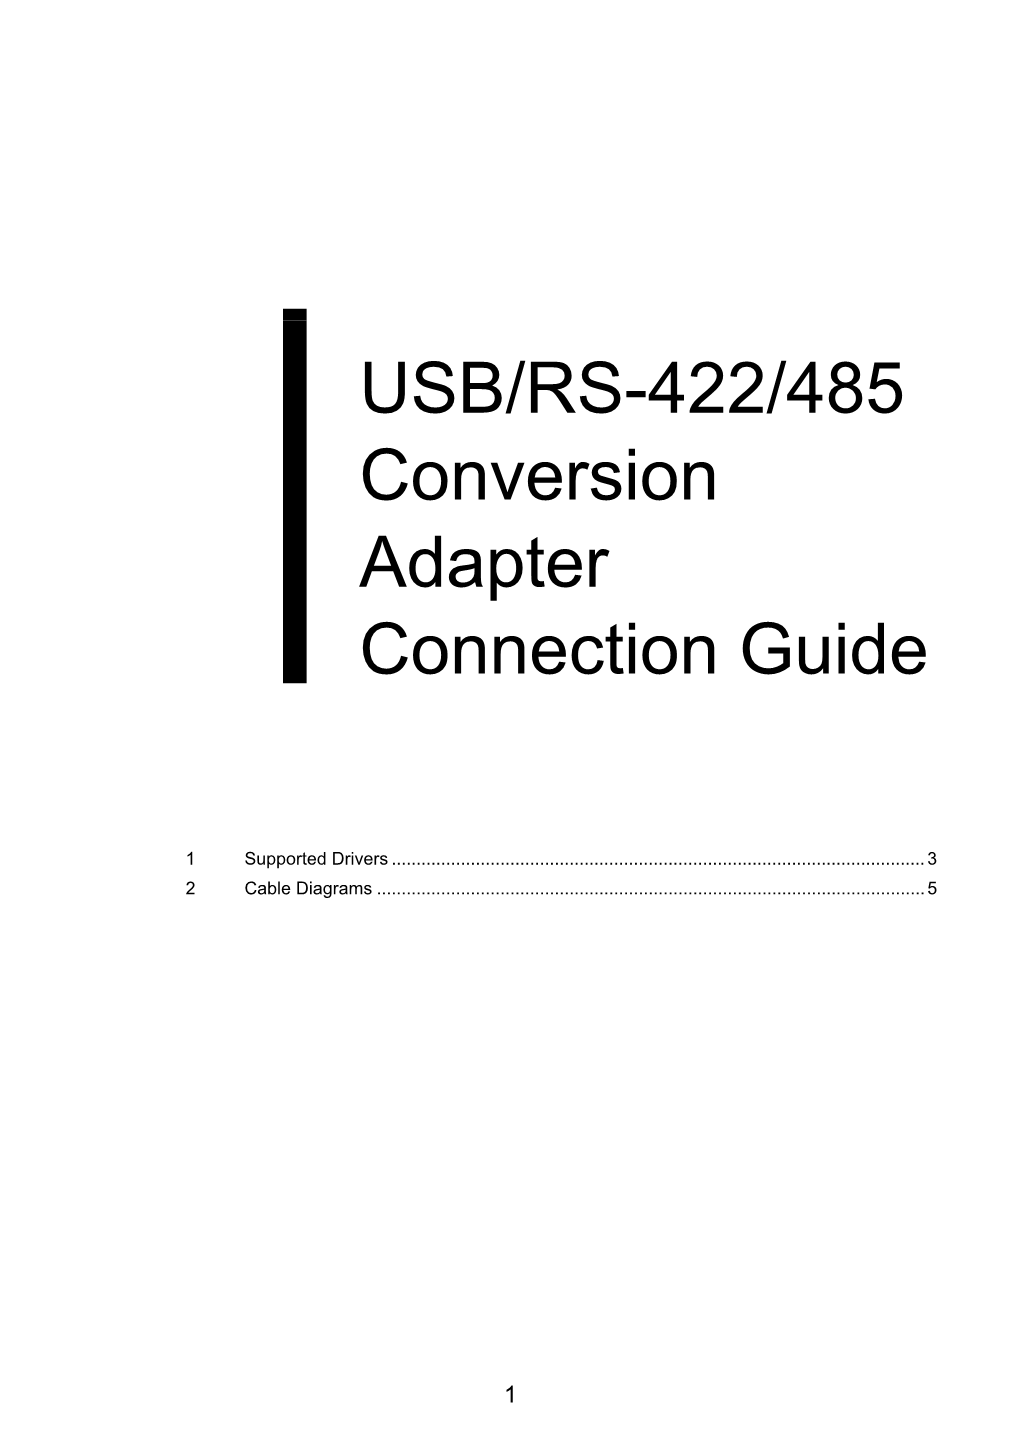 USB/RS-422/485 Conversion Adapter Connection Guide